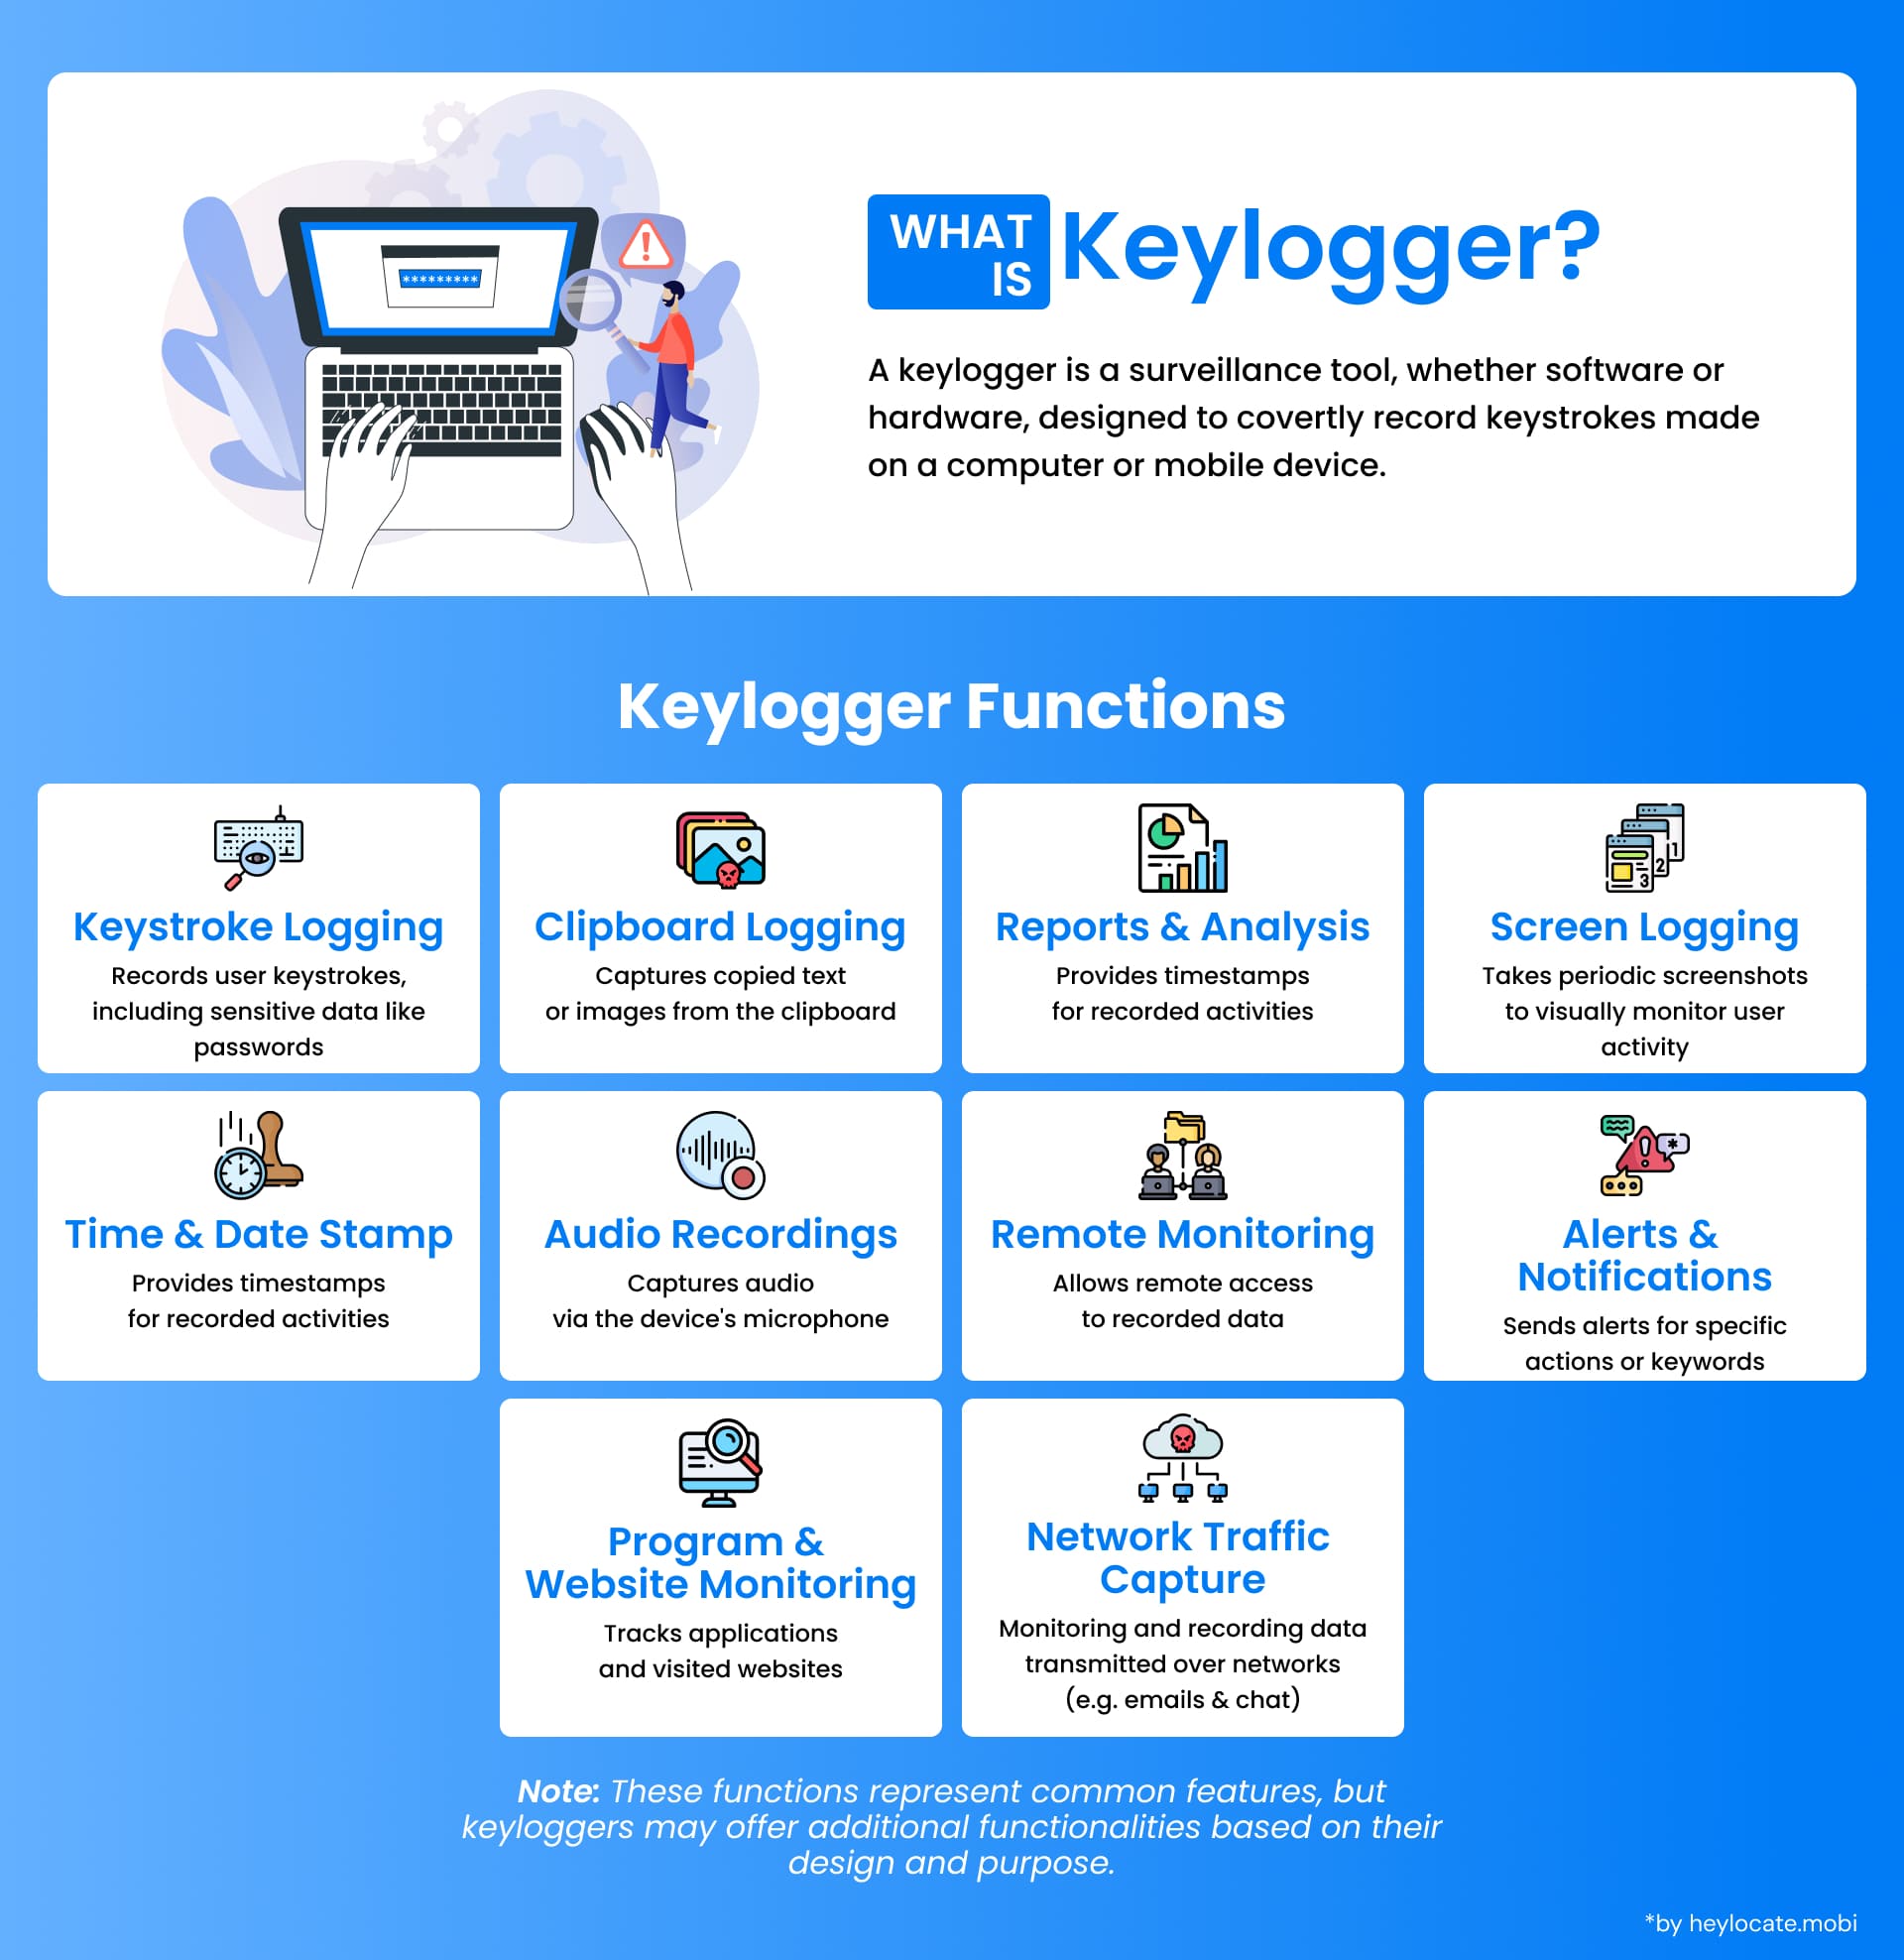 Graphic illustration defining what is keylogger and outlining its various functions like keystroke logging, clipboard logging, and more